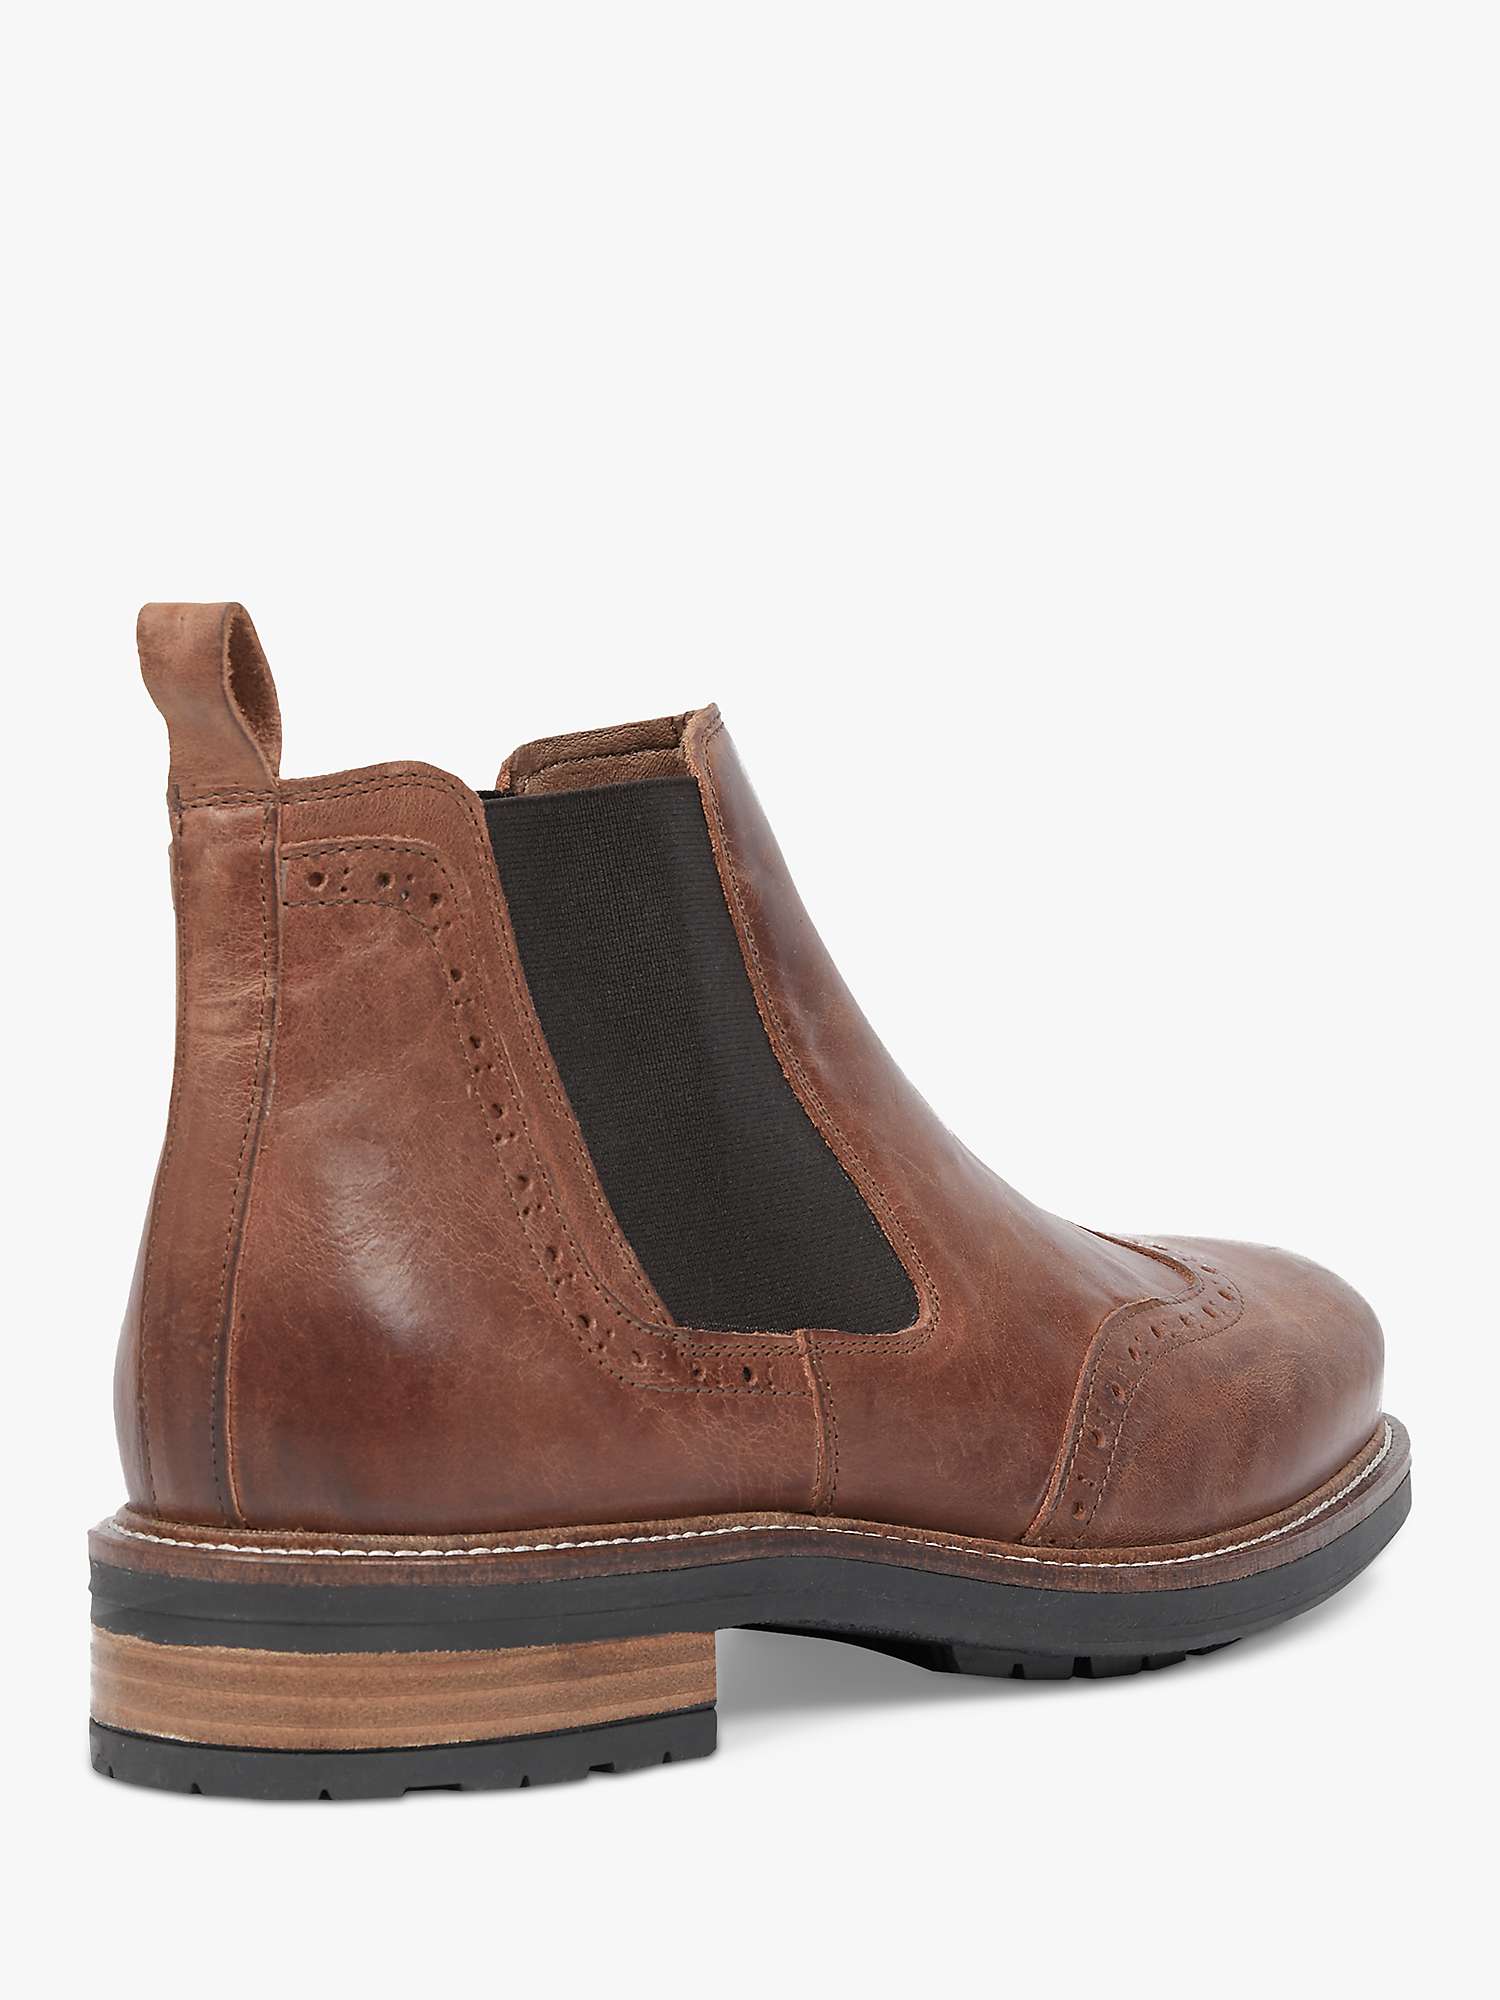 Buy Celtic & Co. Leather Chelsea Brogue Boots, Antique Brown Online at johnlewis.com